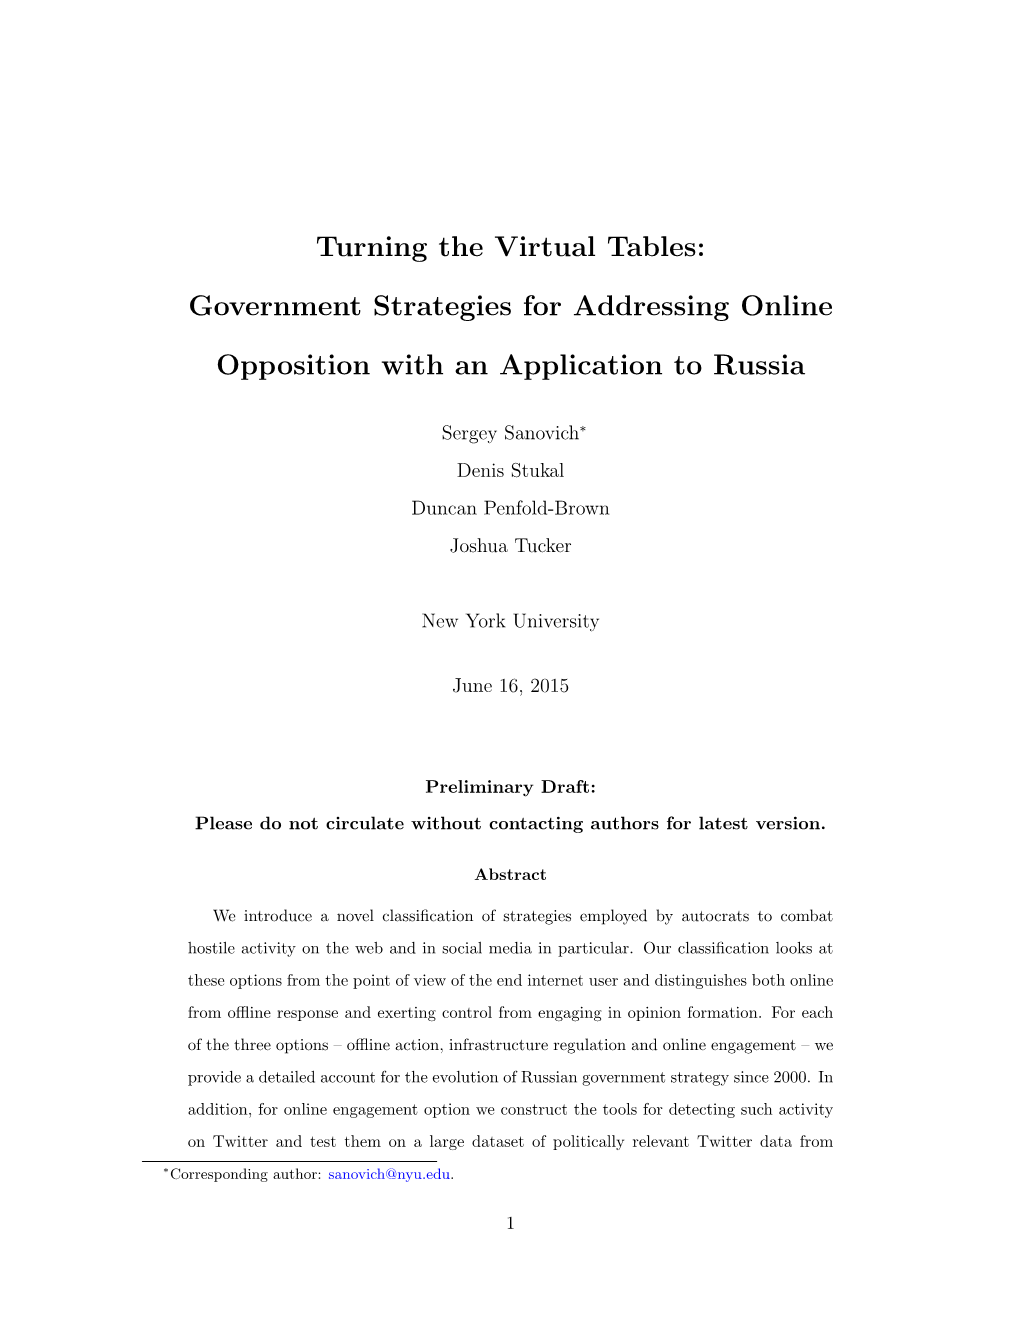 Government Strategies for Addressing Online Opposition with an Application to Russia